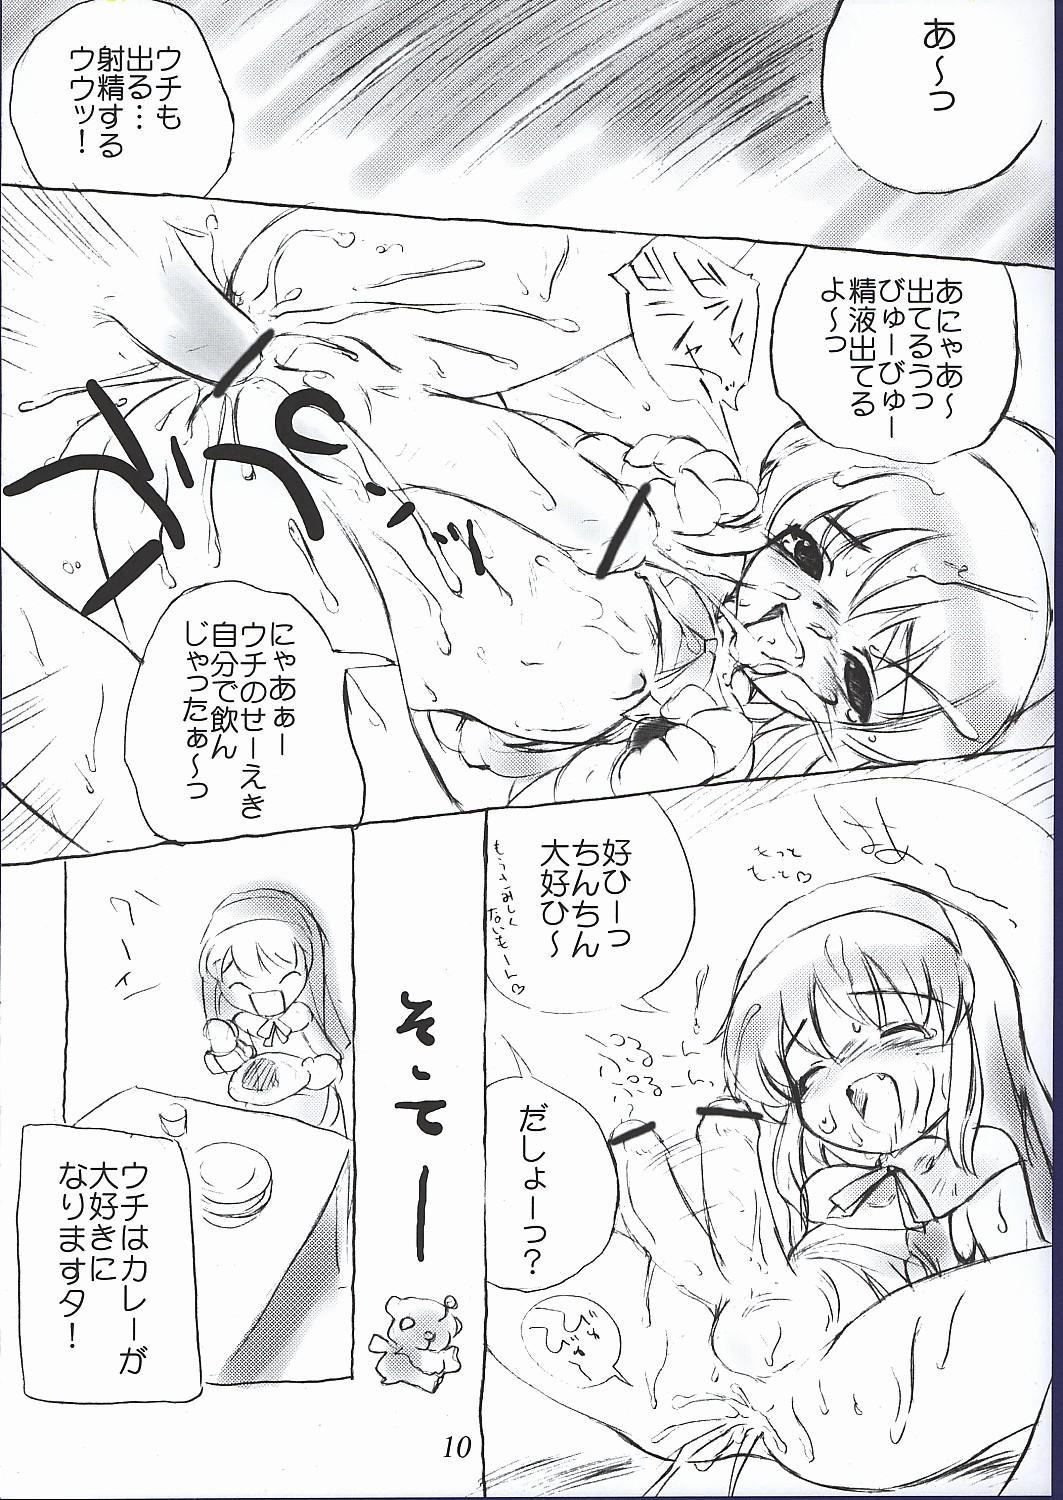 Cojiendo Divided world - Guilty gear Pigtails - Page 9